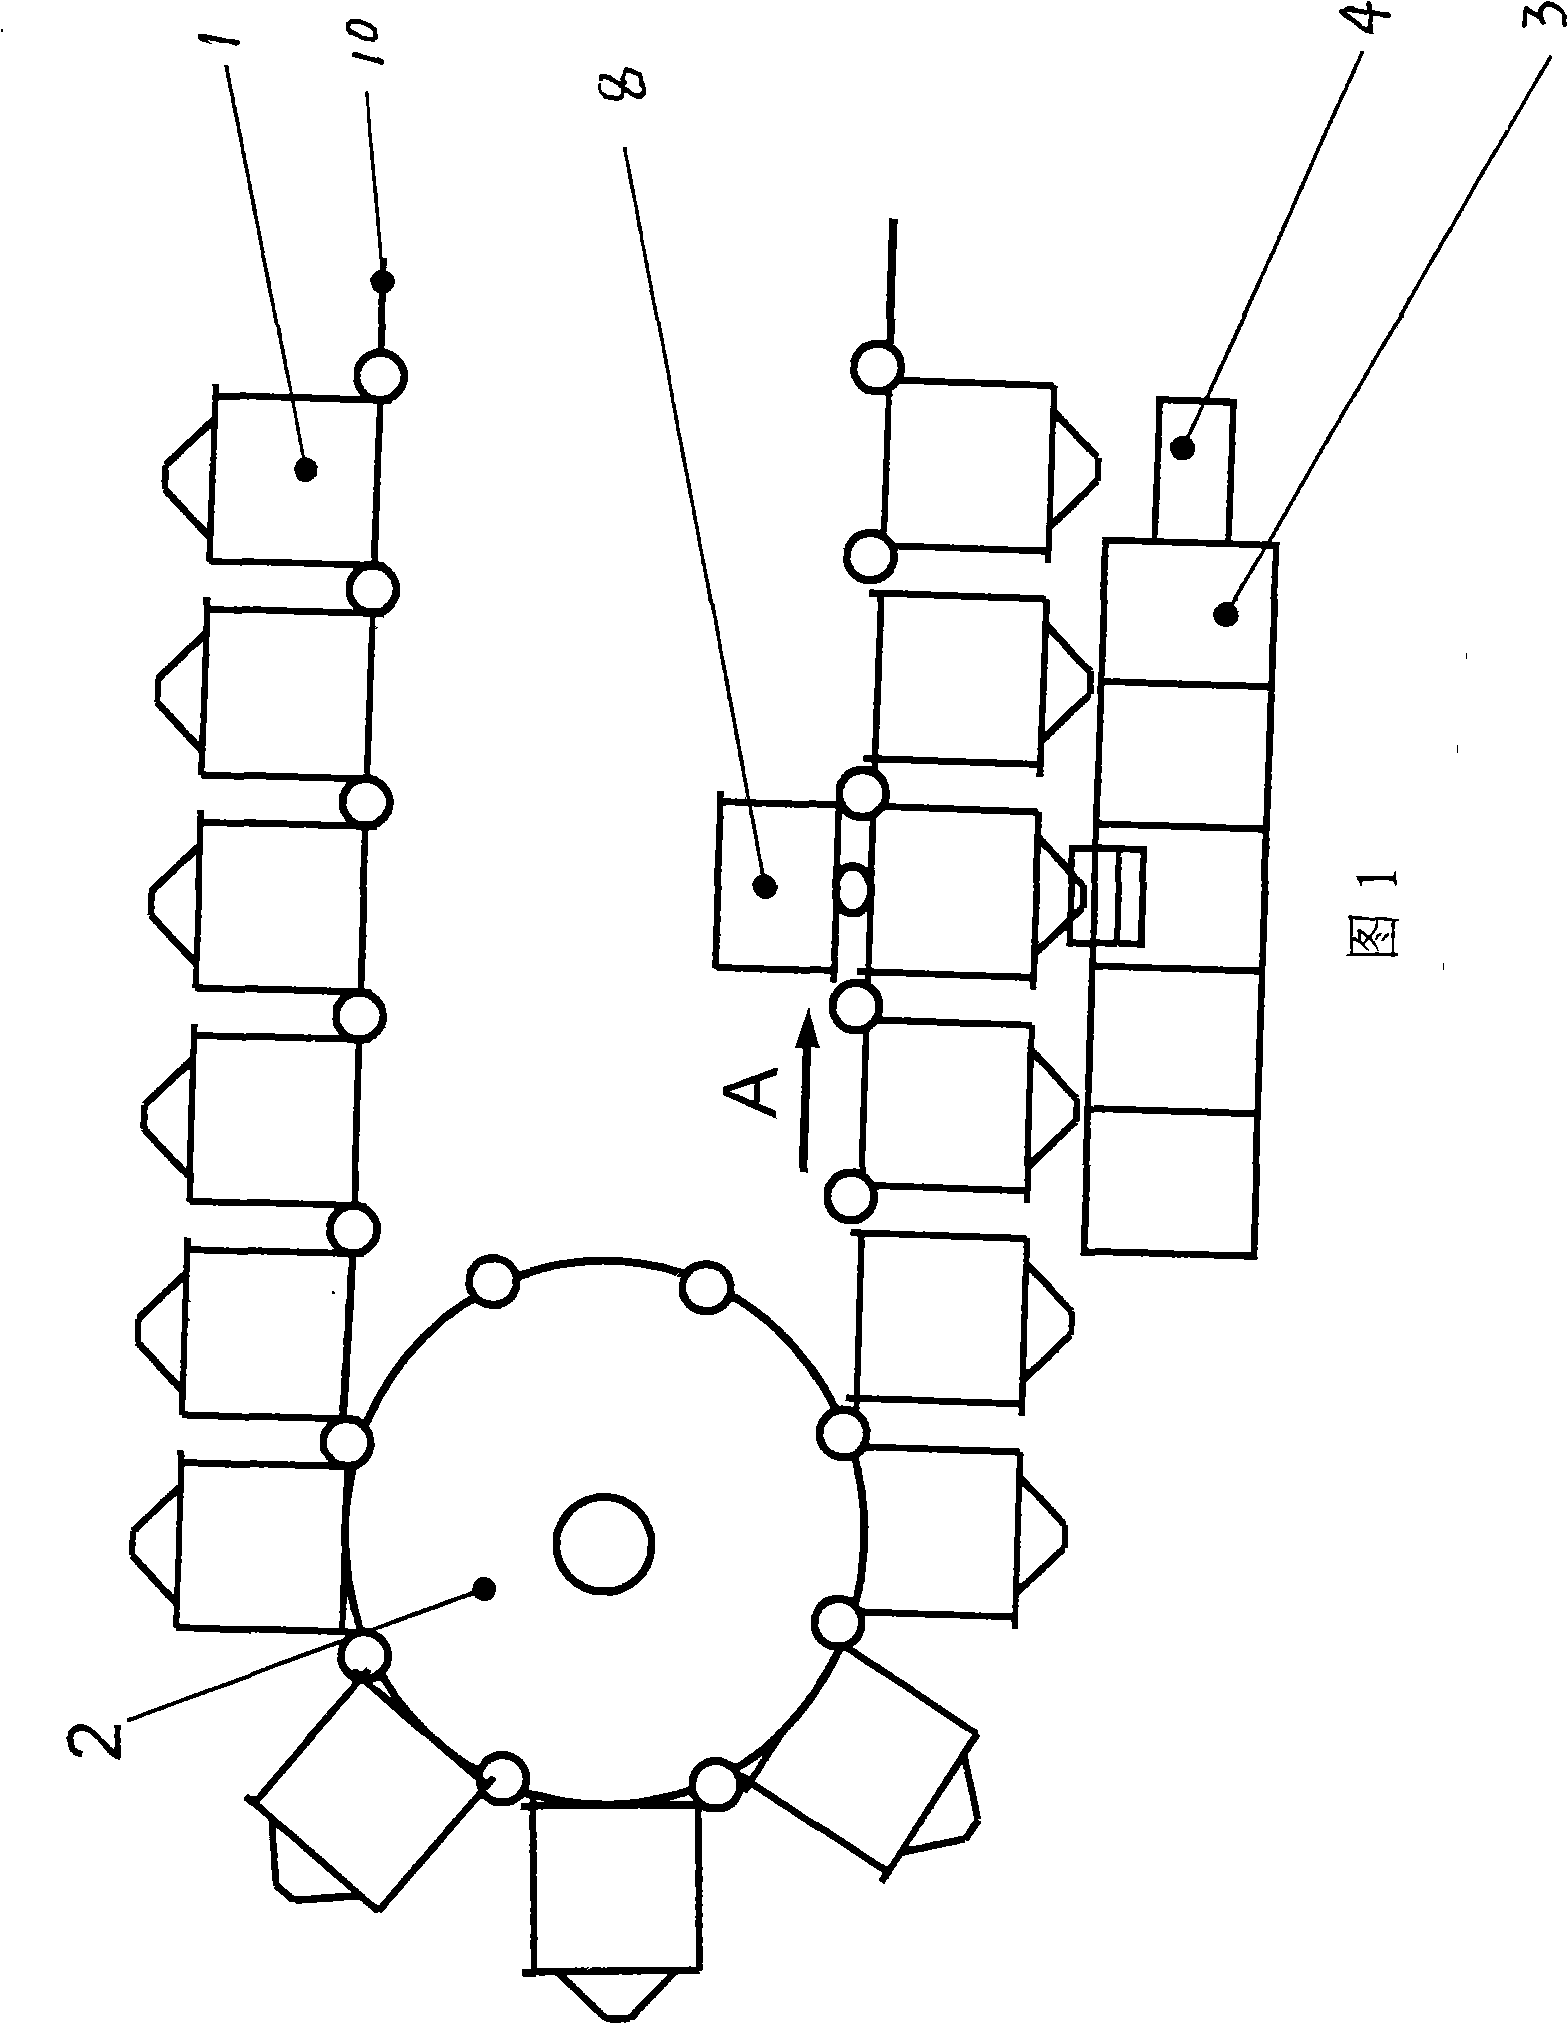 Automatic dispensation apparatus for traditional Chinese medicine